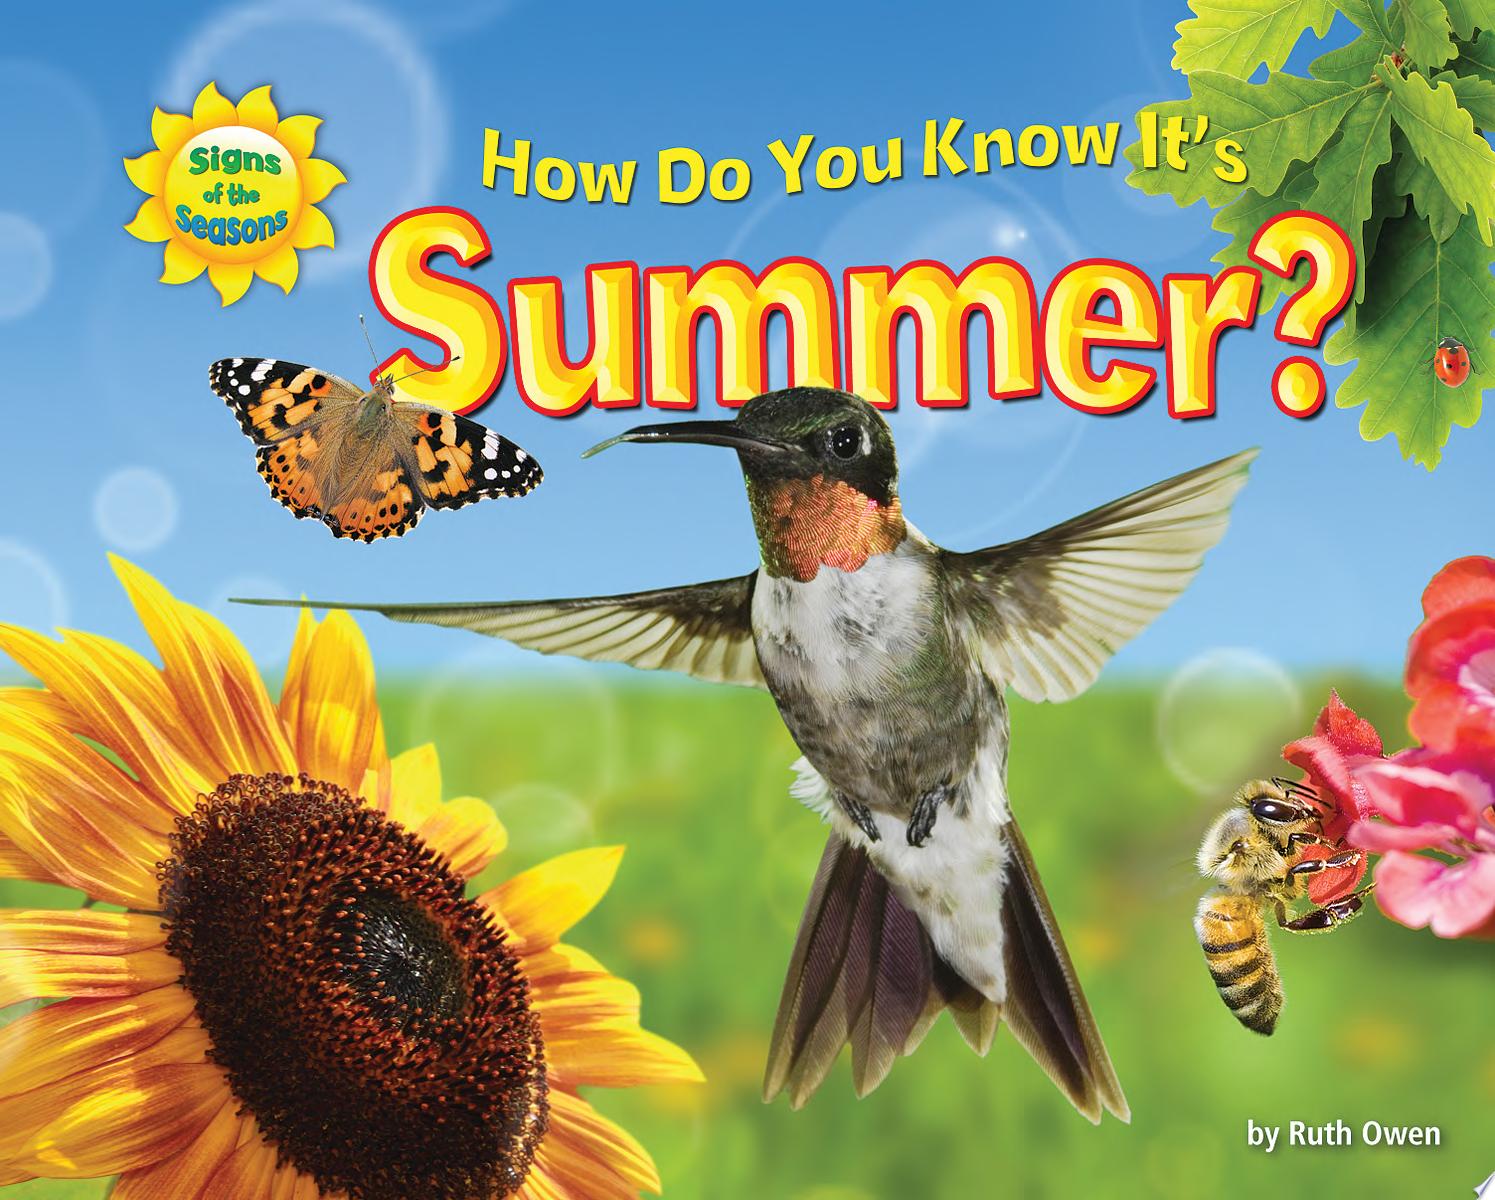 Image for "How Do You Know It's Summer?"